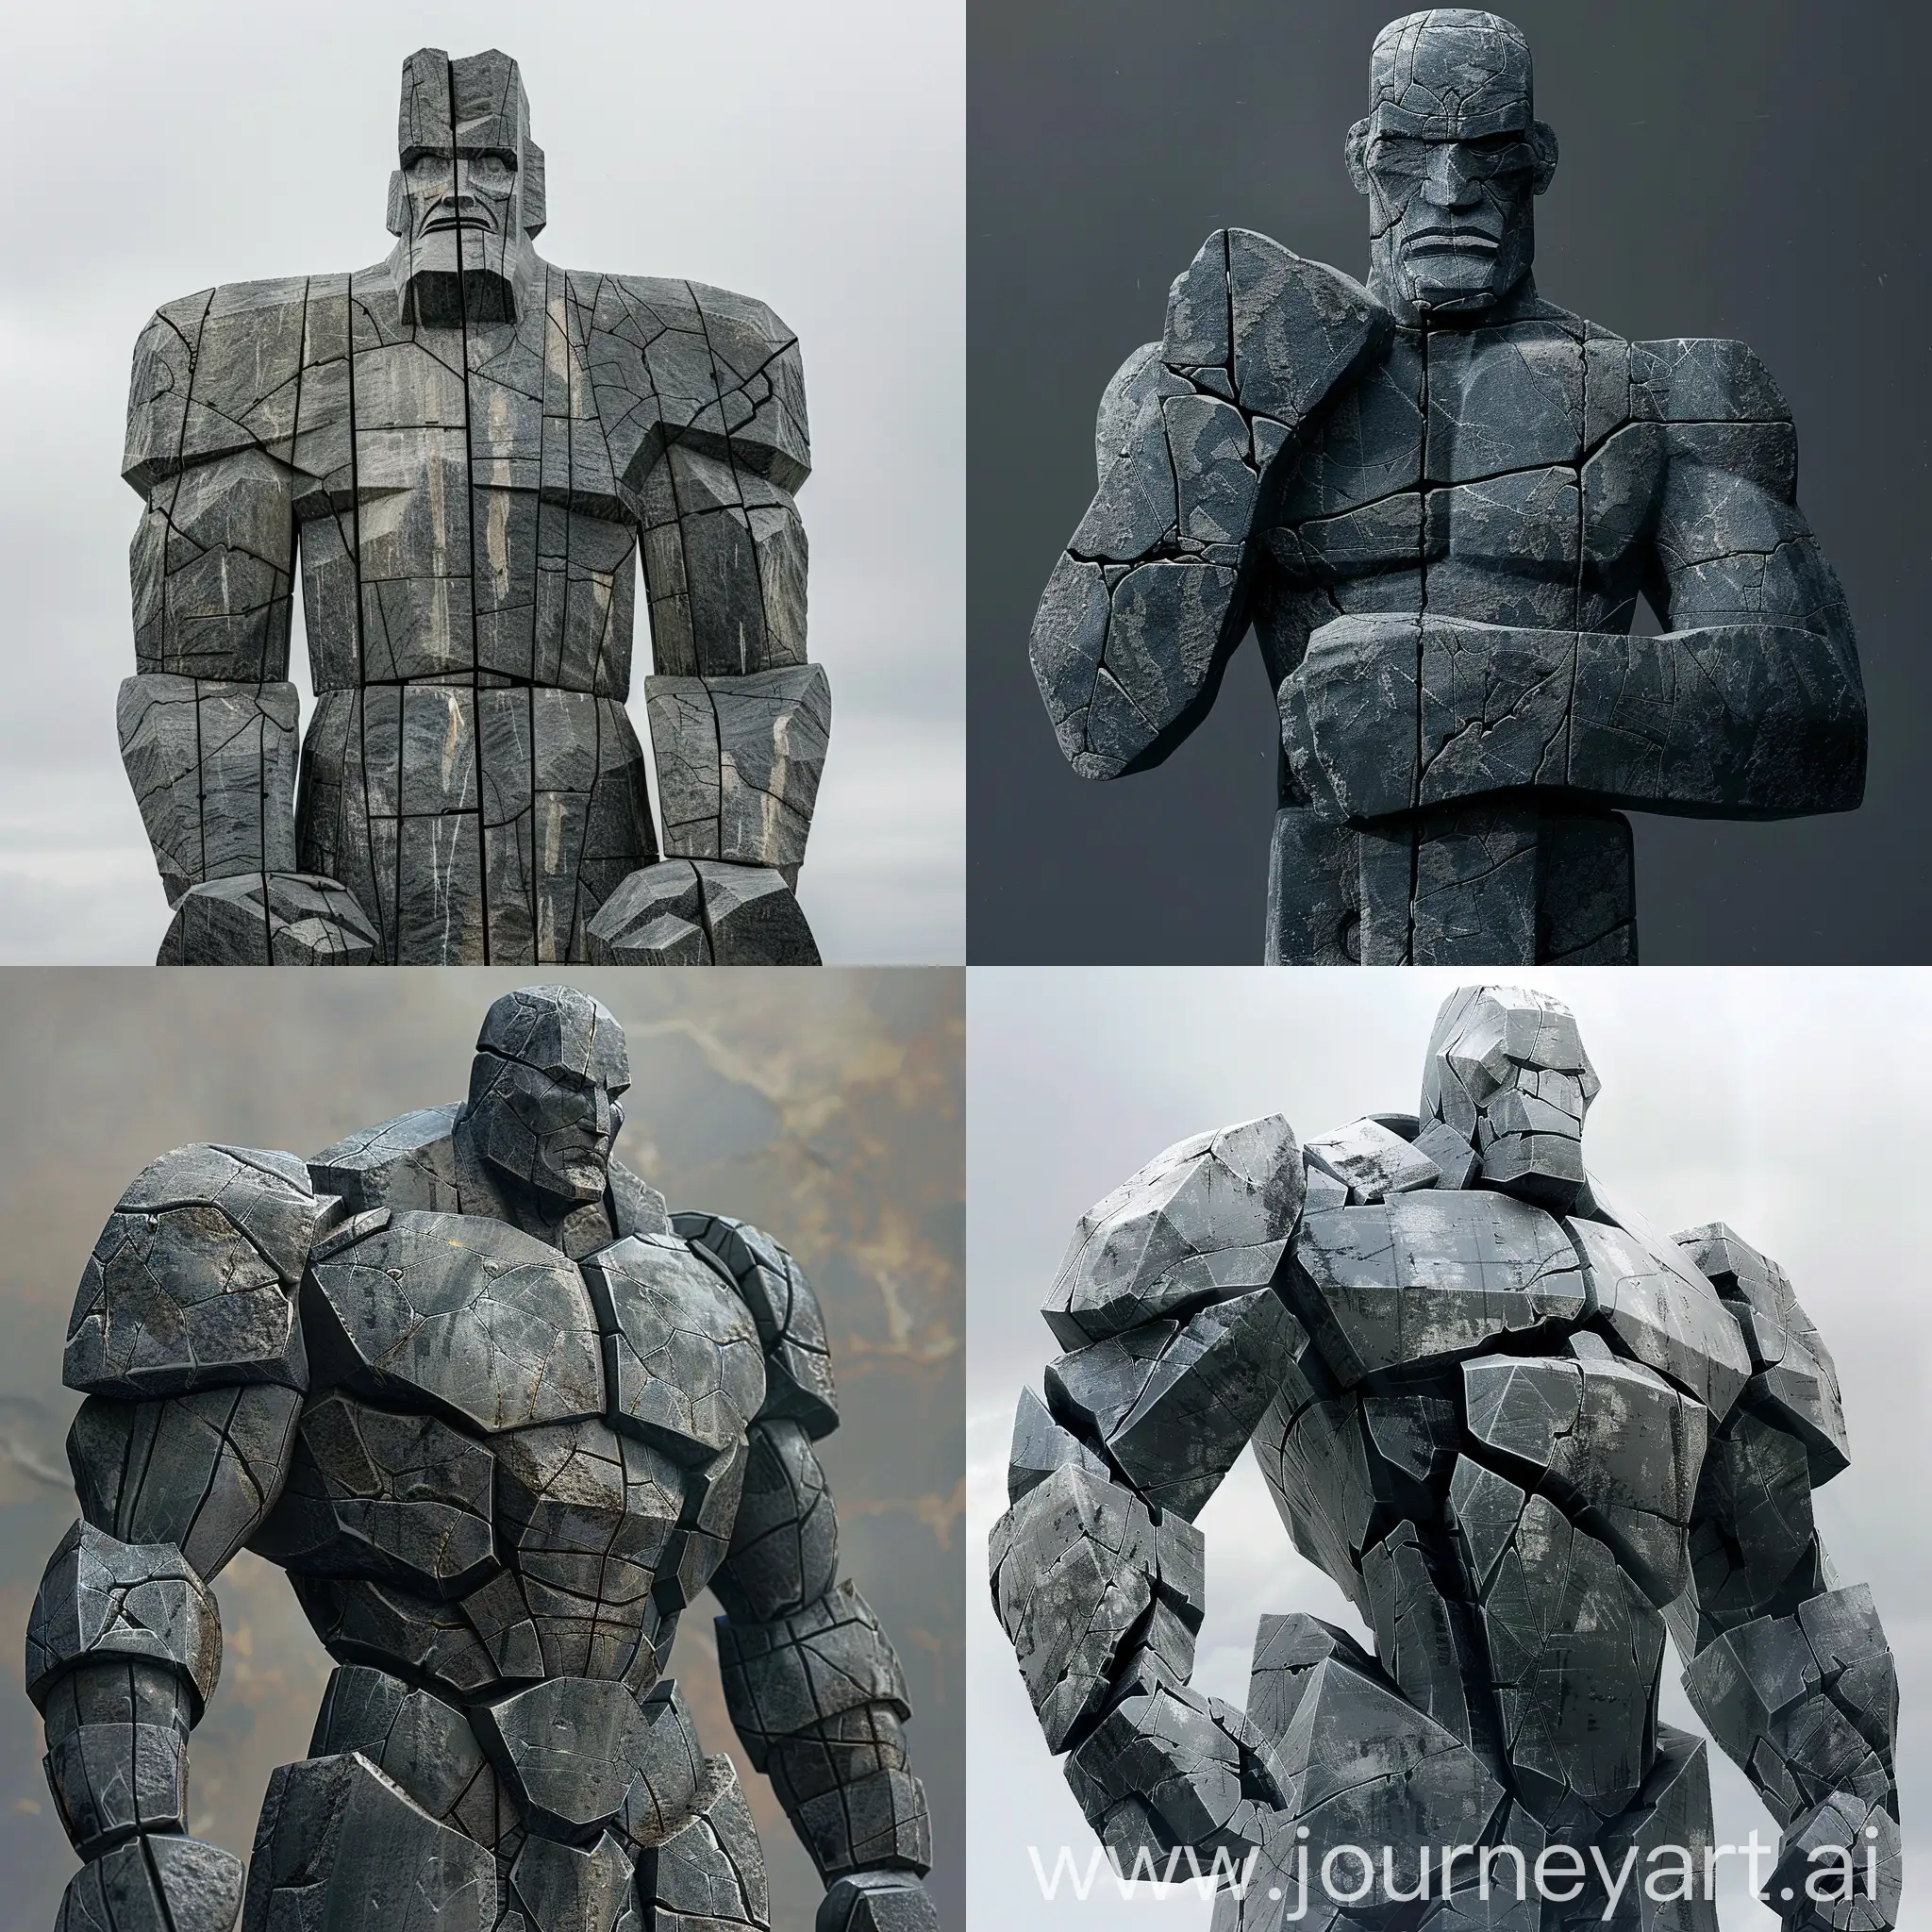 Towering figures sculpted from grey or black stone, Stone Warriors stand roughly 10 feet tall and exude an aura of stoic power. Their angular bodies are devoid of facial features, replaced with smooth, emotionless visages. Deep gouges and cracks etch intricate patterns across their surface, hinting at their ancient origins. These silent guardians stand eternally vigilant, their stone fists perpetually clenched, ready to crush any who dare trespass on their domain.